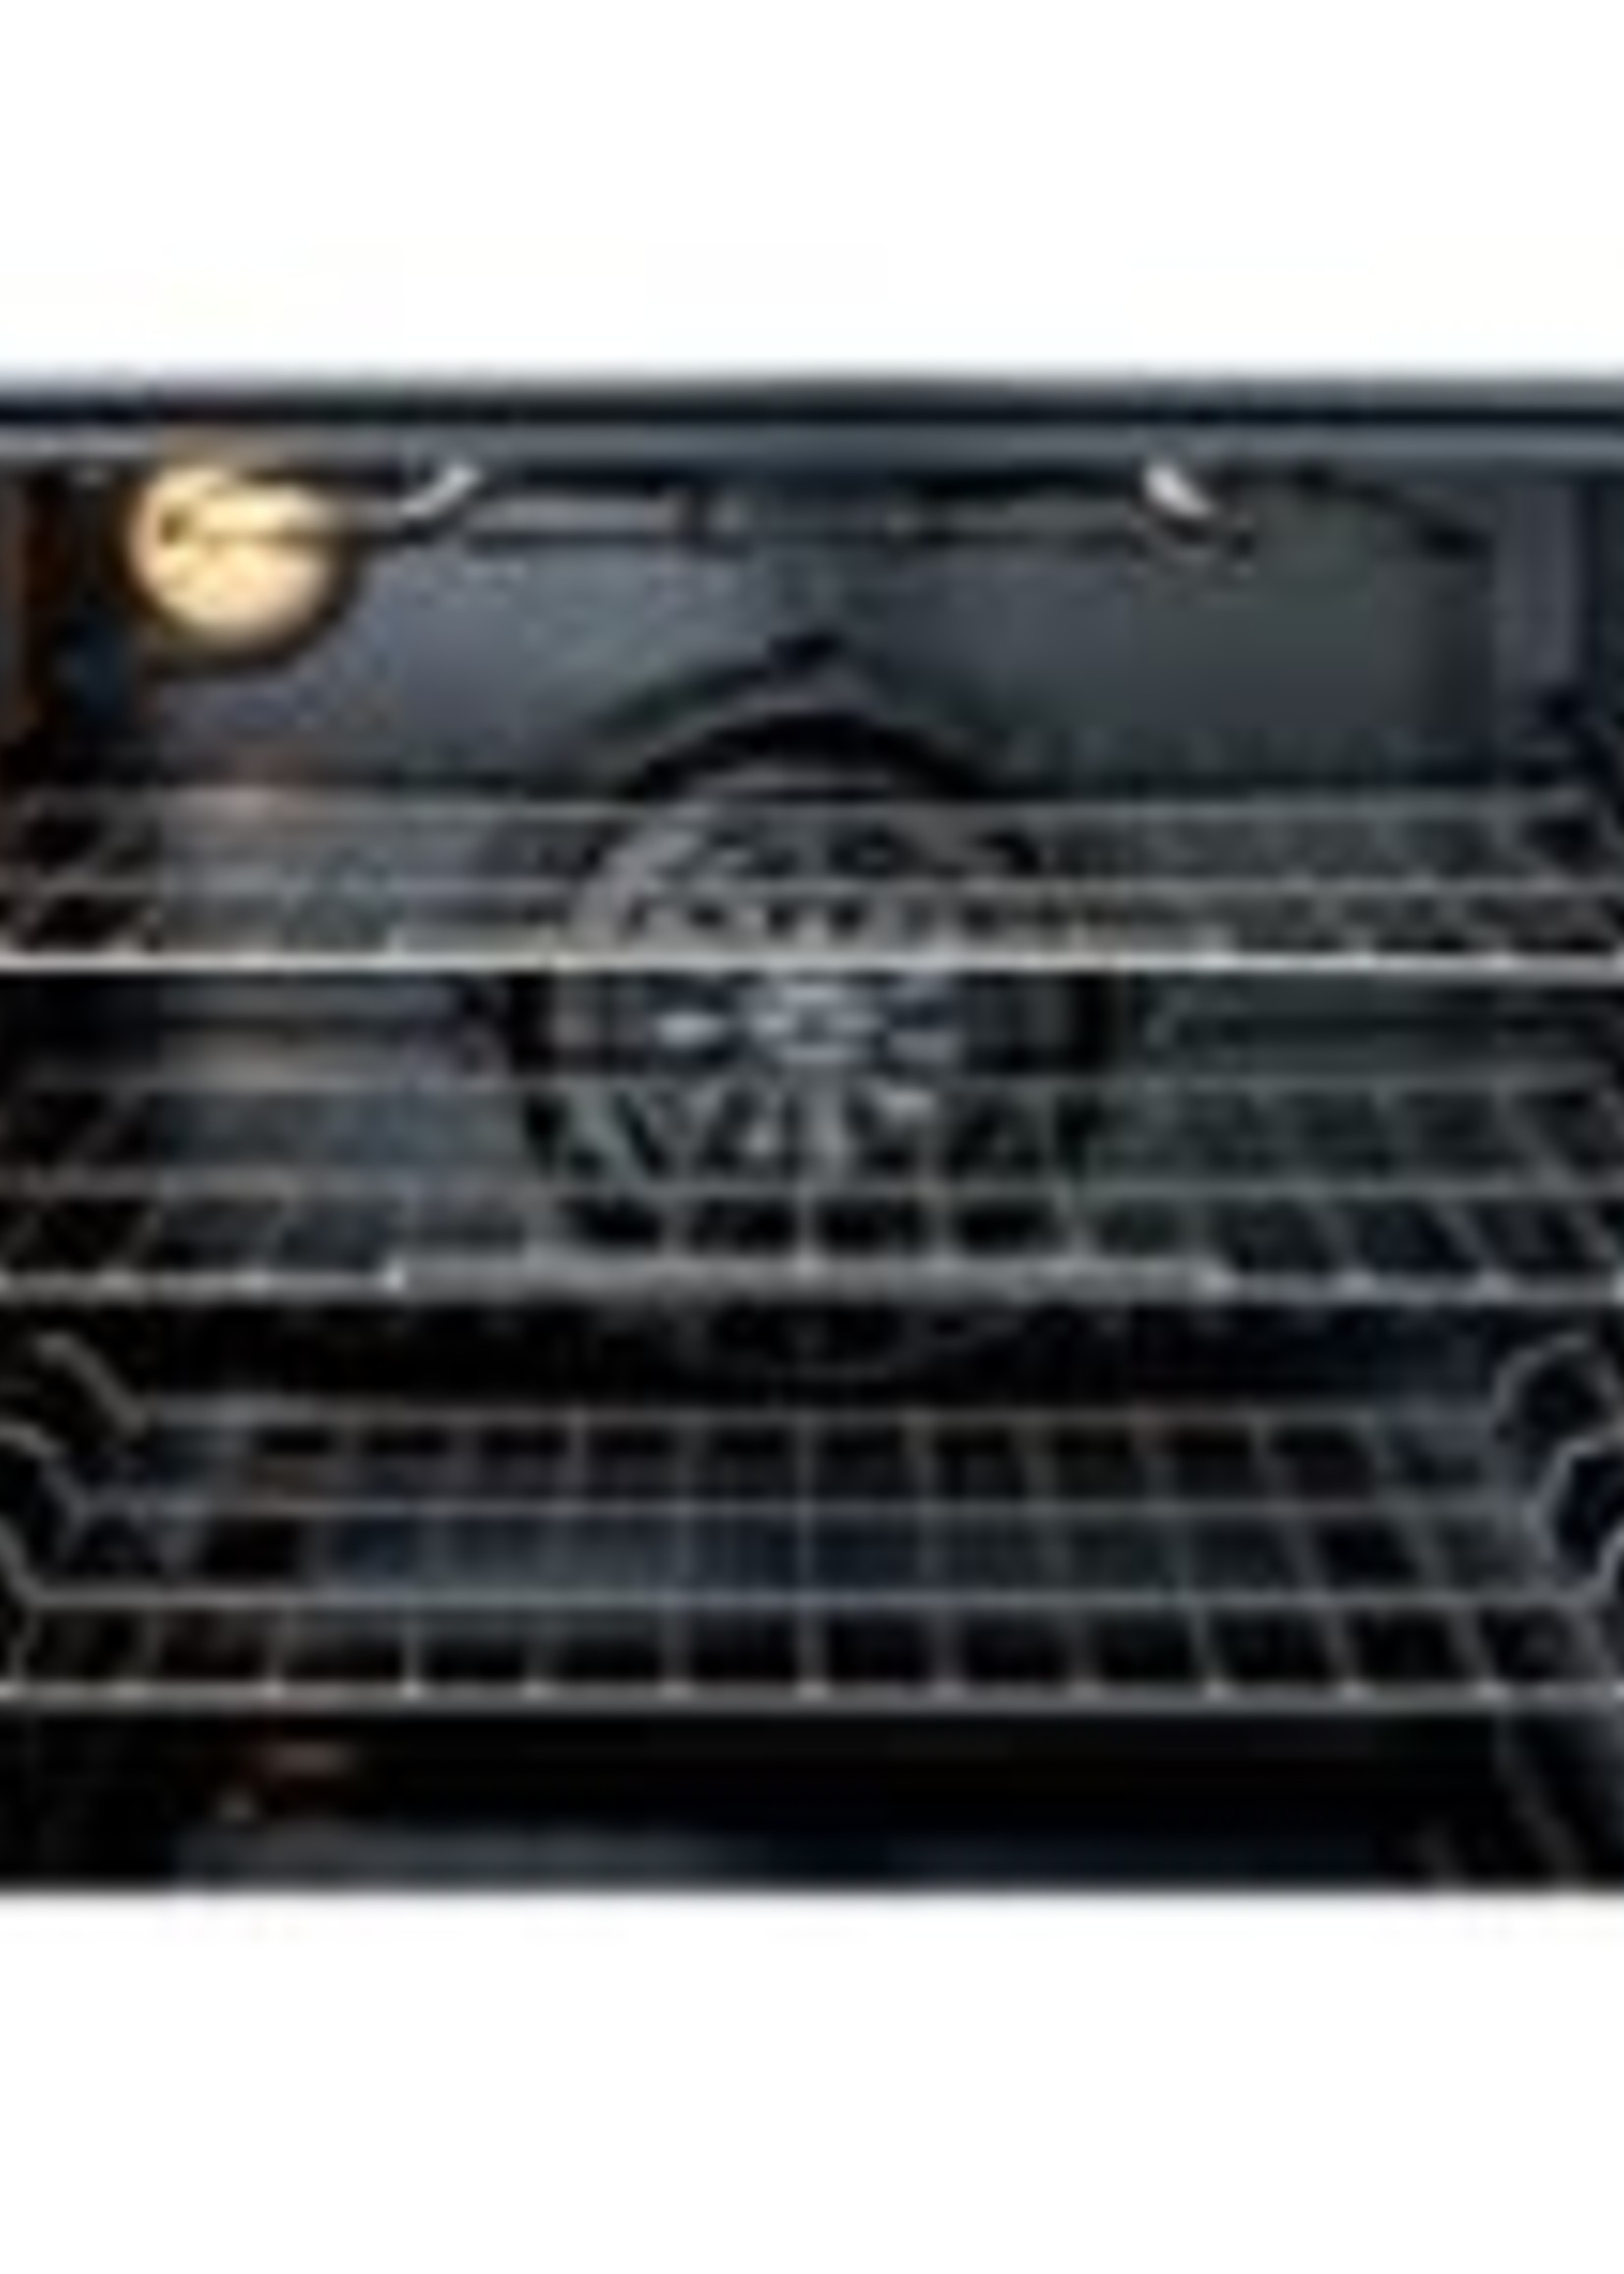 Frigidaire *Frigidaire GCRE3060AF  (NIB)  5.7 cu. ft. Electric Range with True Convection Self-Cleaning Oven in Stainless Steel with Air Fry